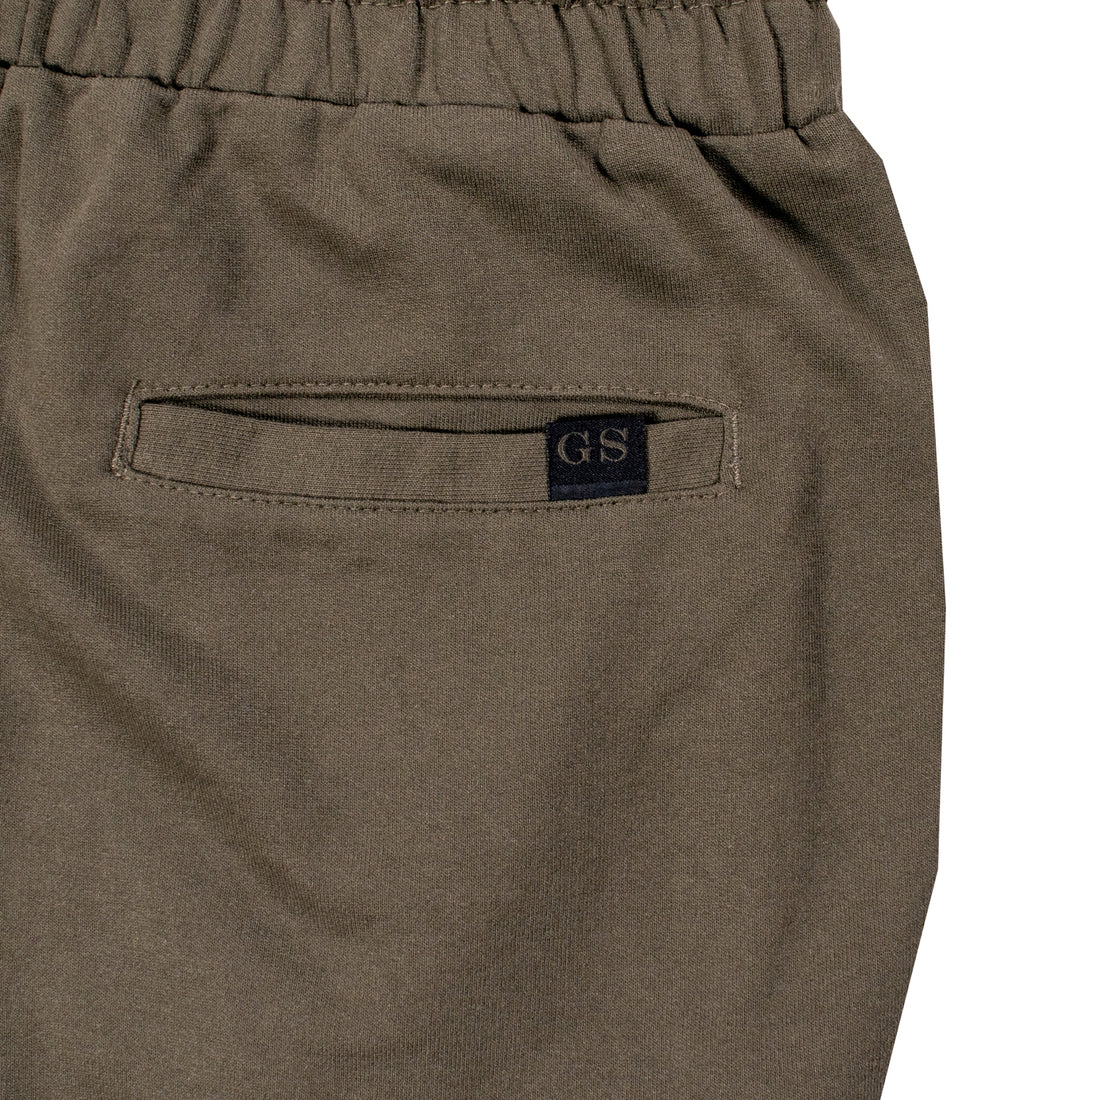 military green sweat shorts for men | Grunt Style 